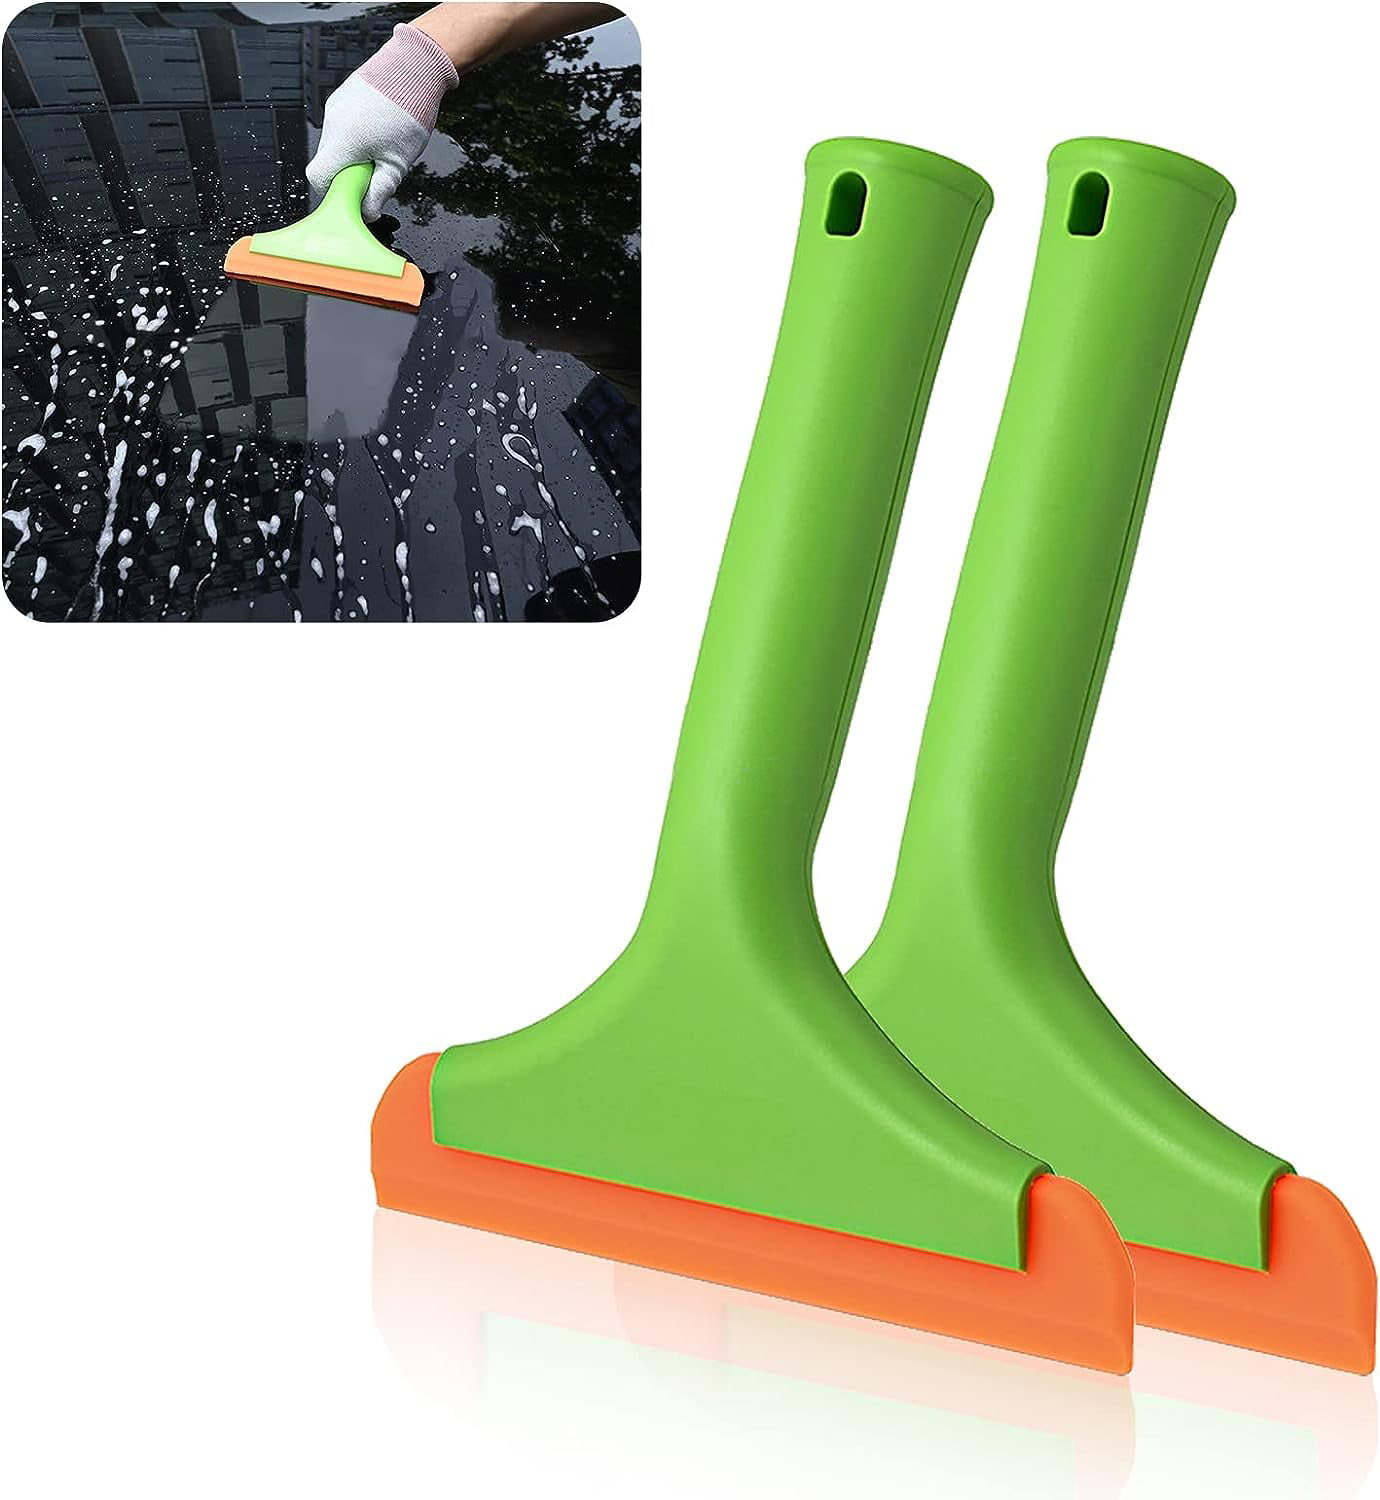  RICHMIRTH Silicone Rubber Blade Shower Squeegee 9 in